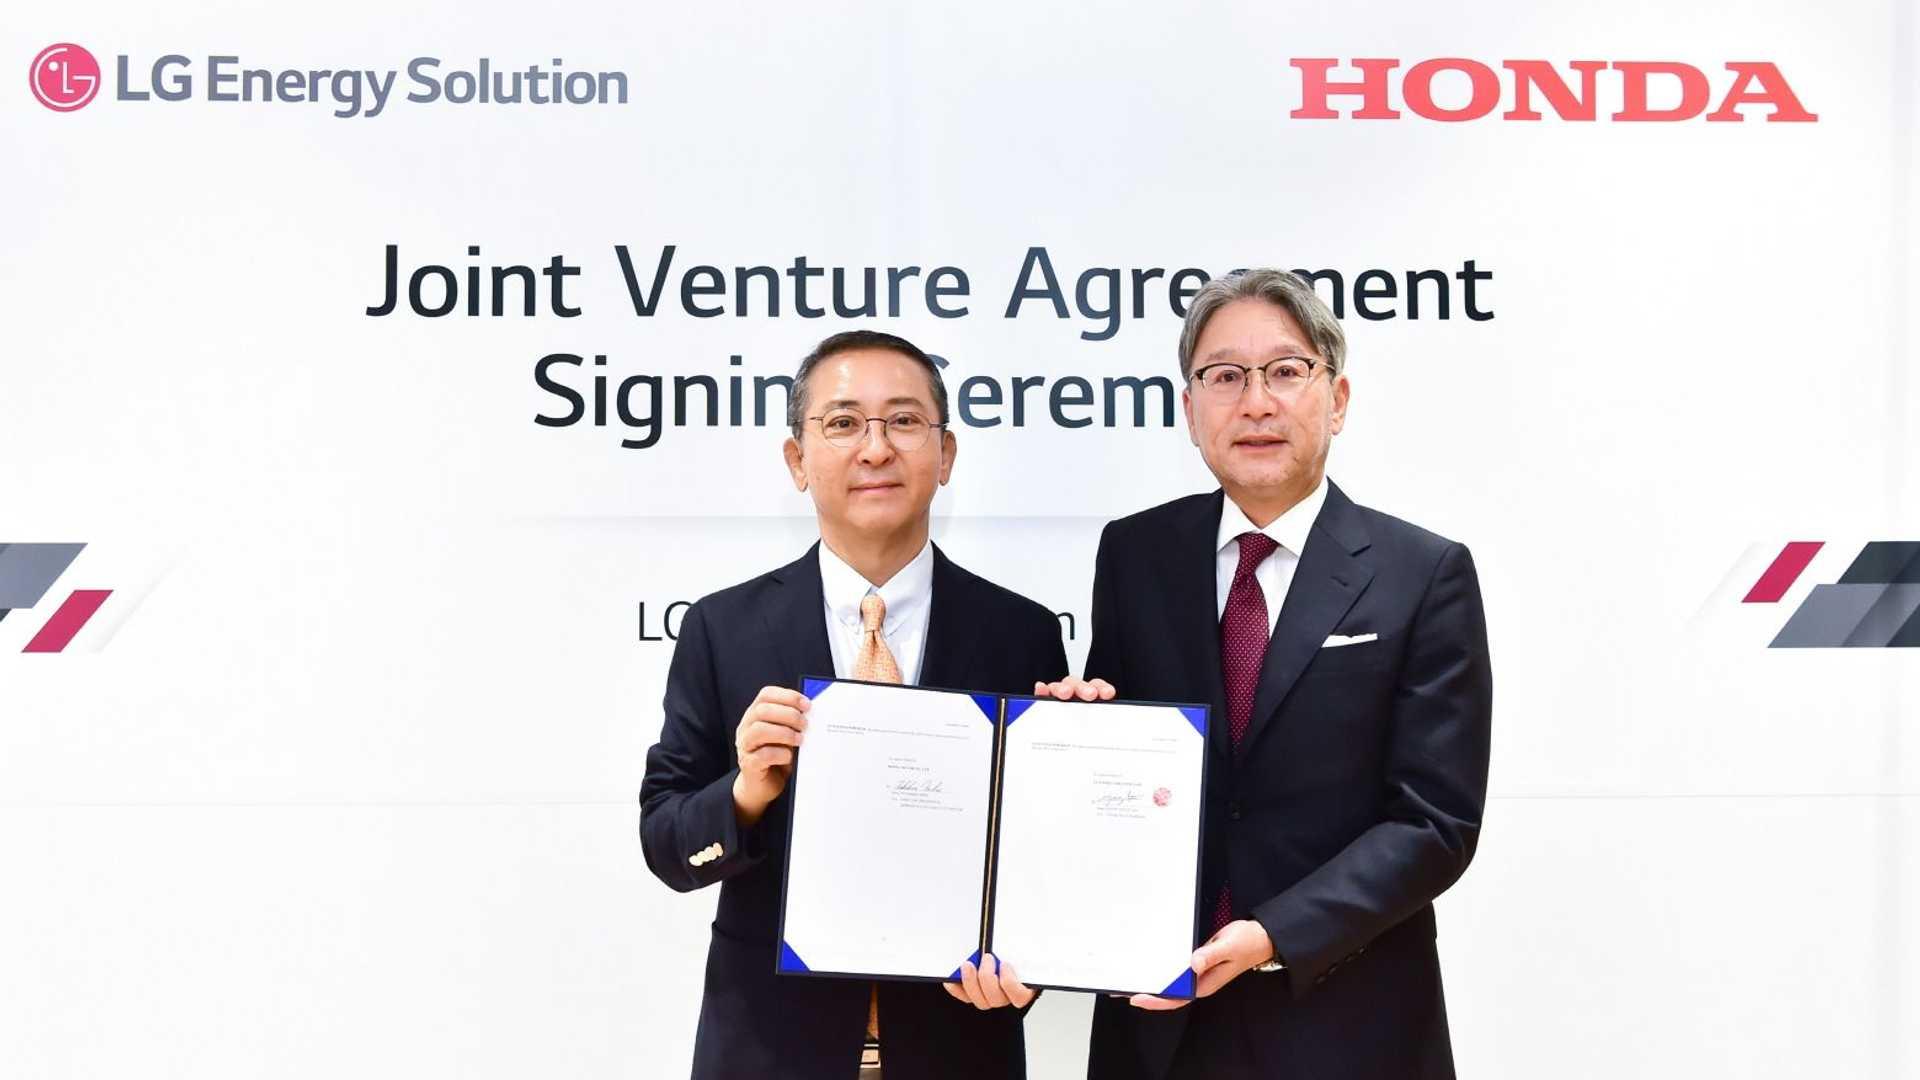 lg-energy-solution-and-honda-to-form-joint-venture-for-ev-battery-production-in-the-u.s.